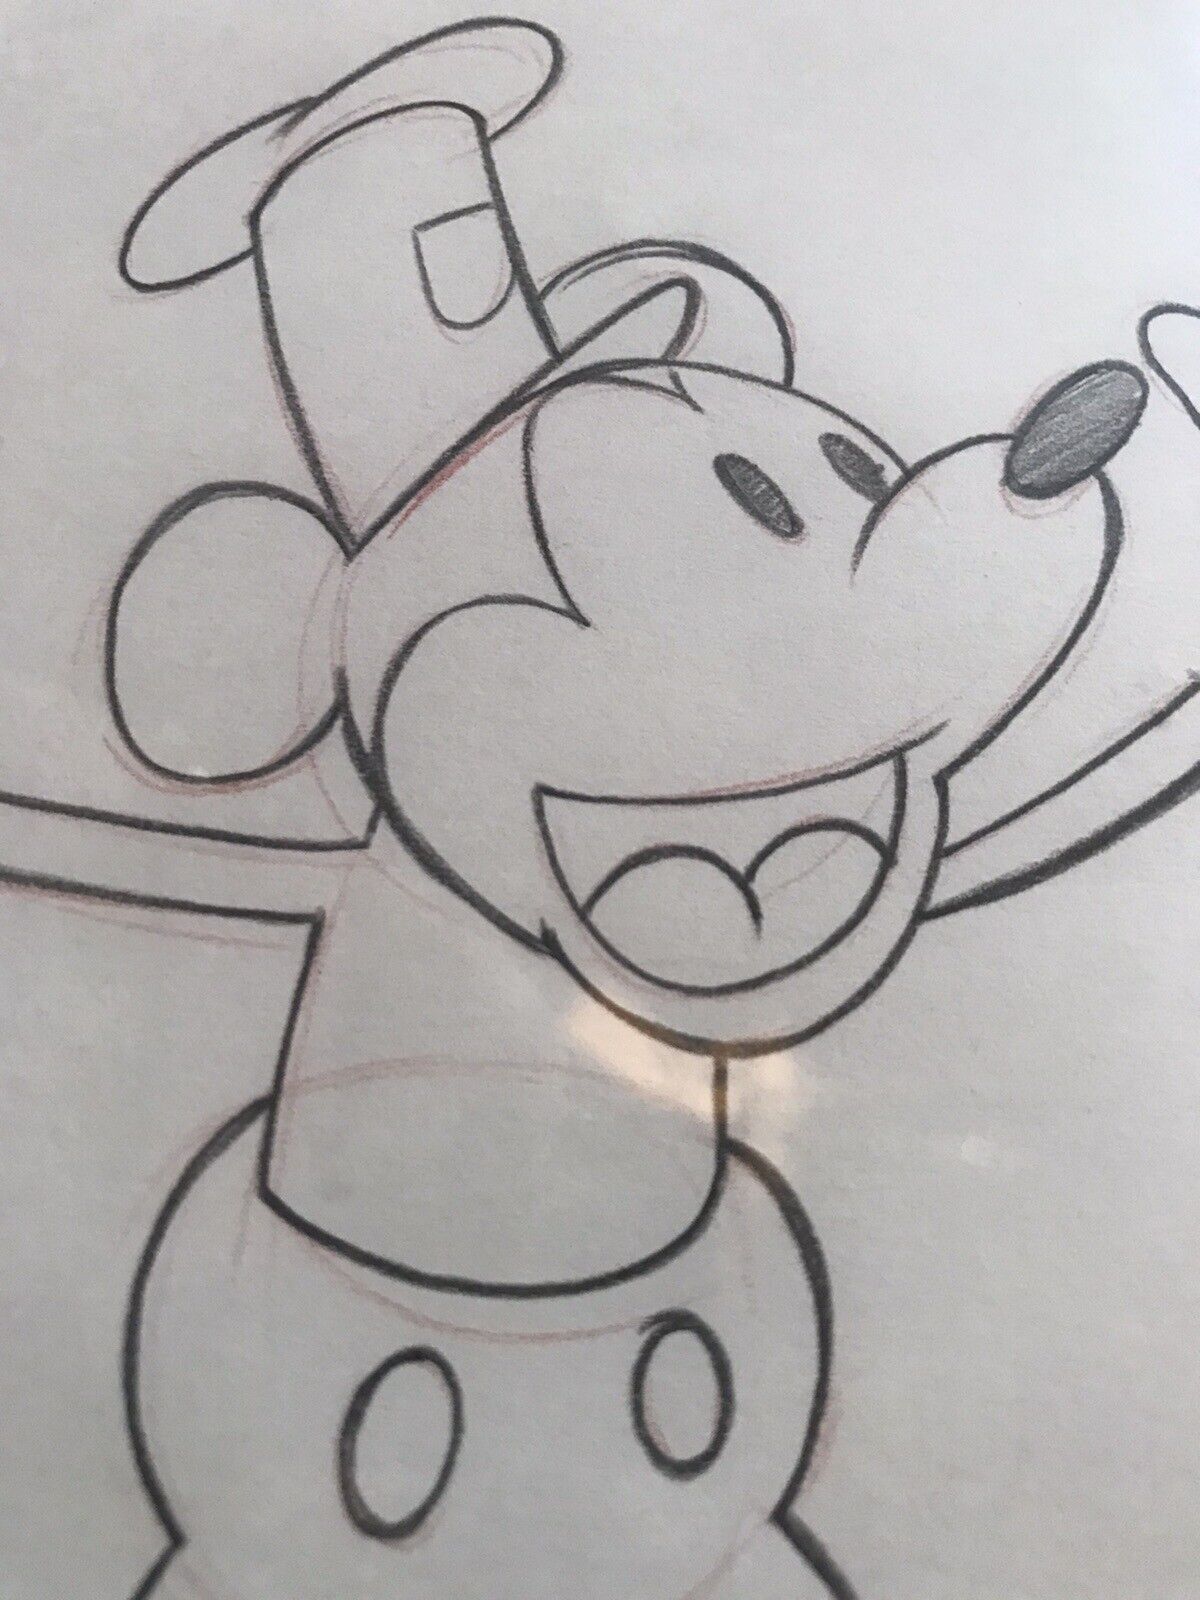 13x16🔥RARE DISNEY ORIGINAL PENCIL  SKETCH OF STEAMBOAT WILLY🔥SIGNED By MOSER